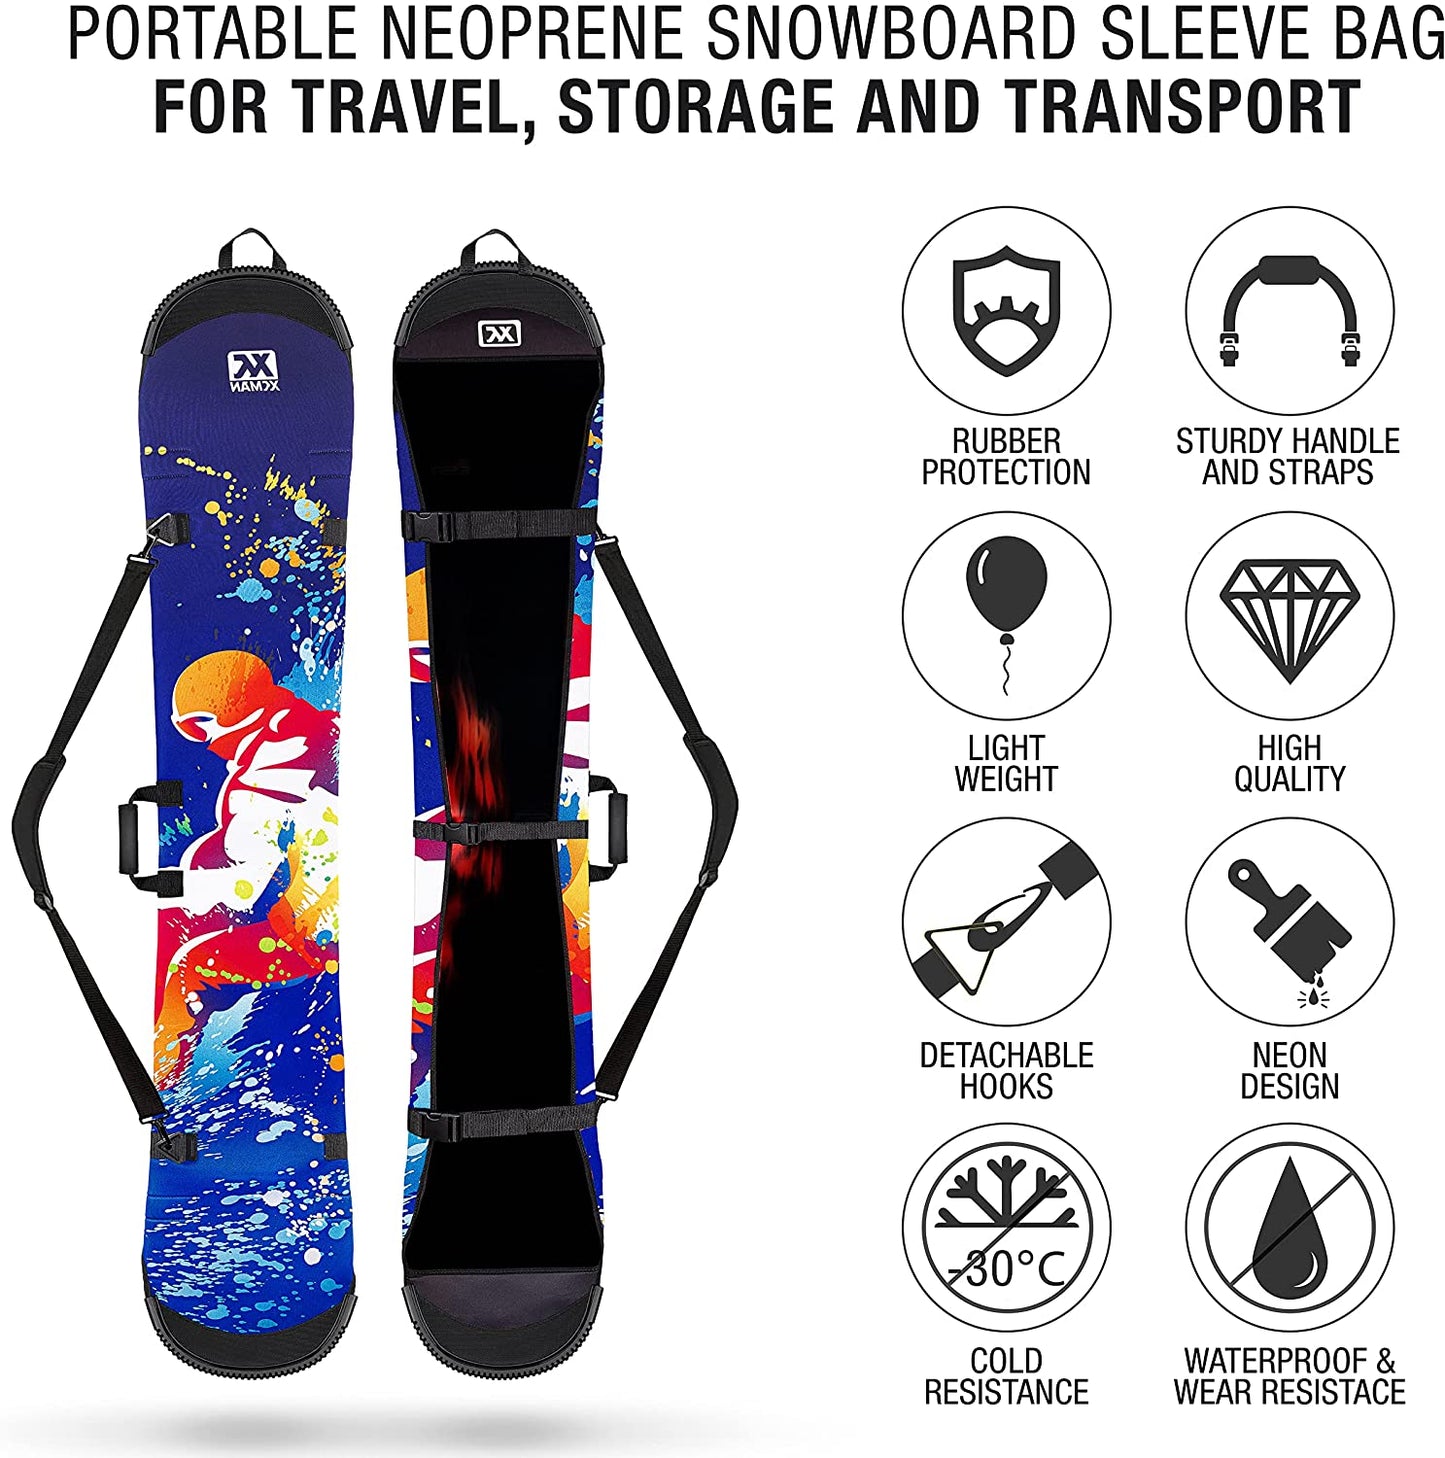 Portable Freestyle Neoprene Snowboard Sleeve, Snowboard Bag for Travel, Storage and Transport